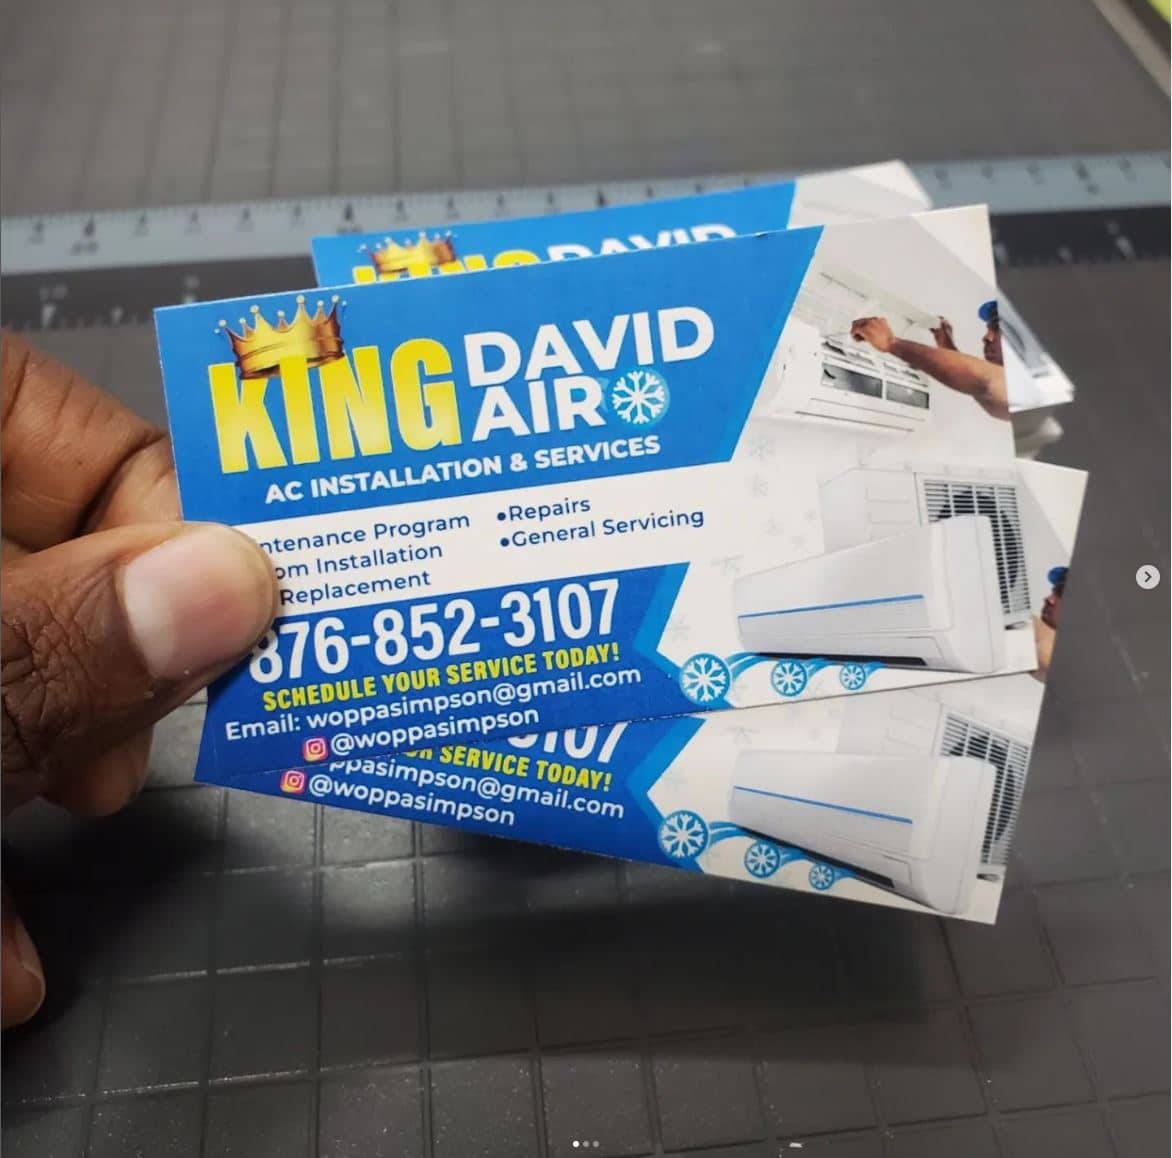 King David Air AC Installation and Services – Repair and installation